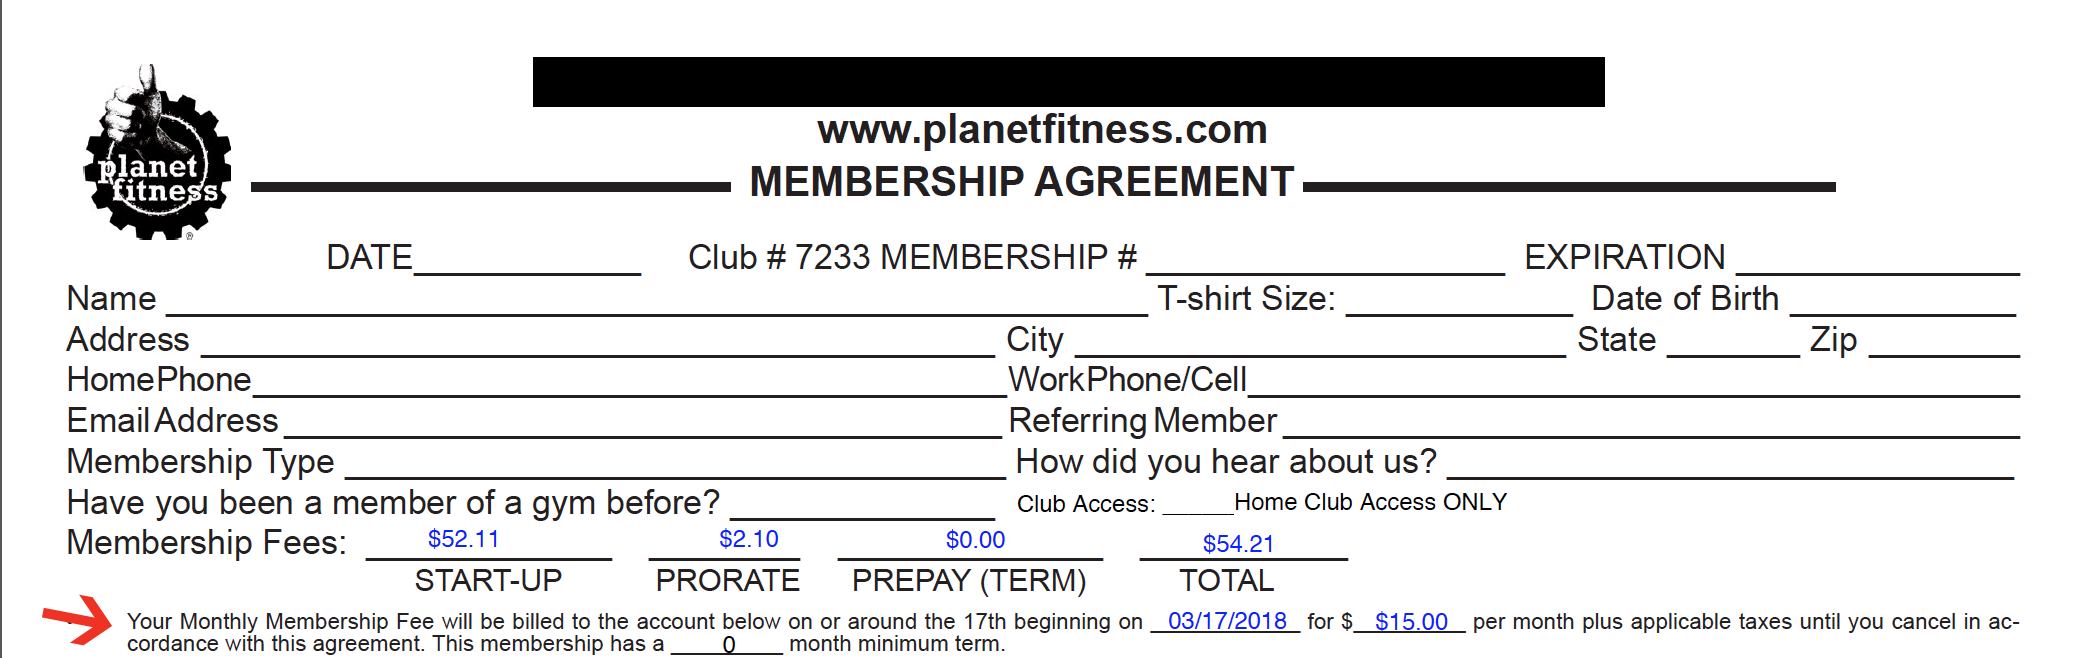 Simple Planet Fitness Membership Cancellation for push your ABS